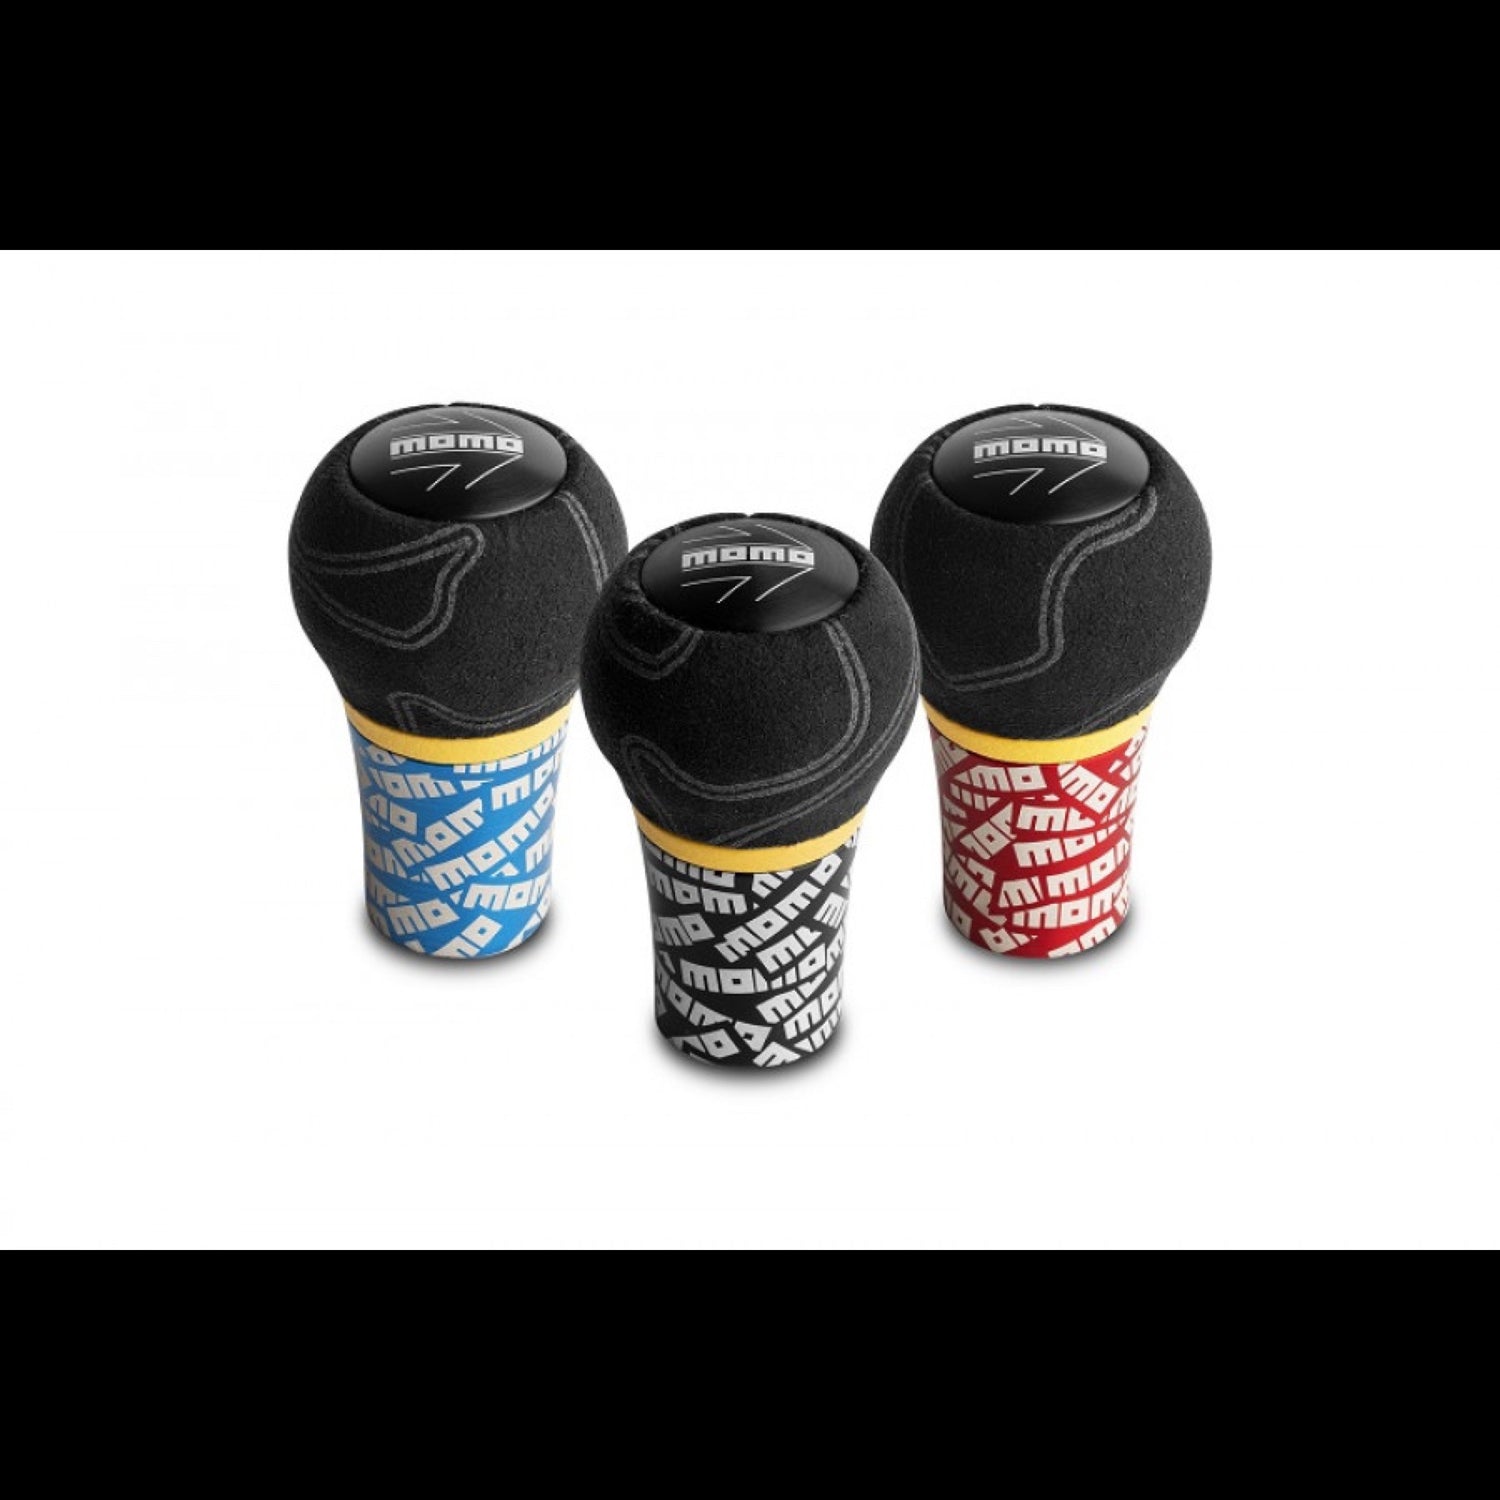 MOMO black leather shift knobs in blue, yellow, and red.